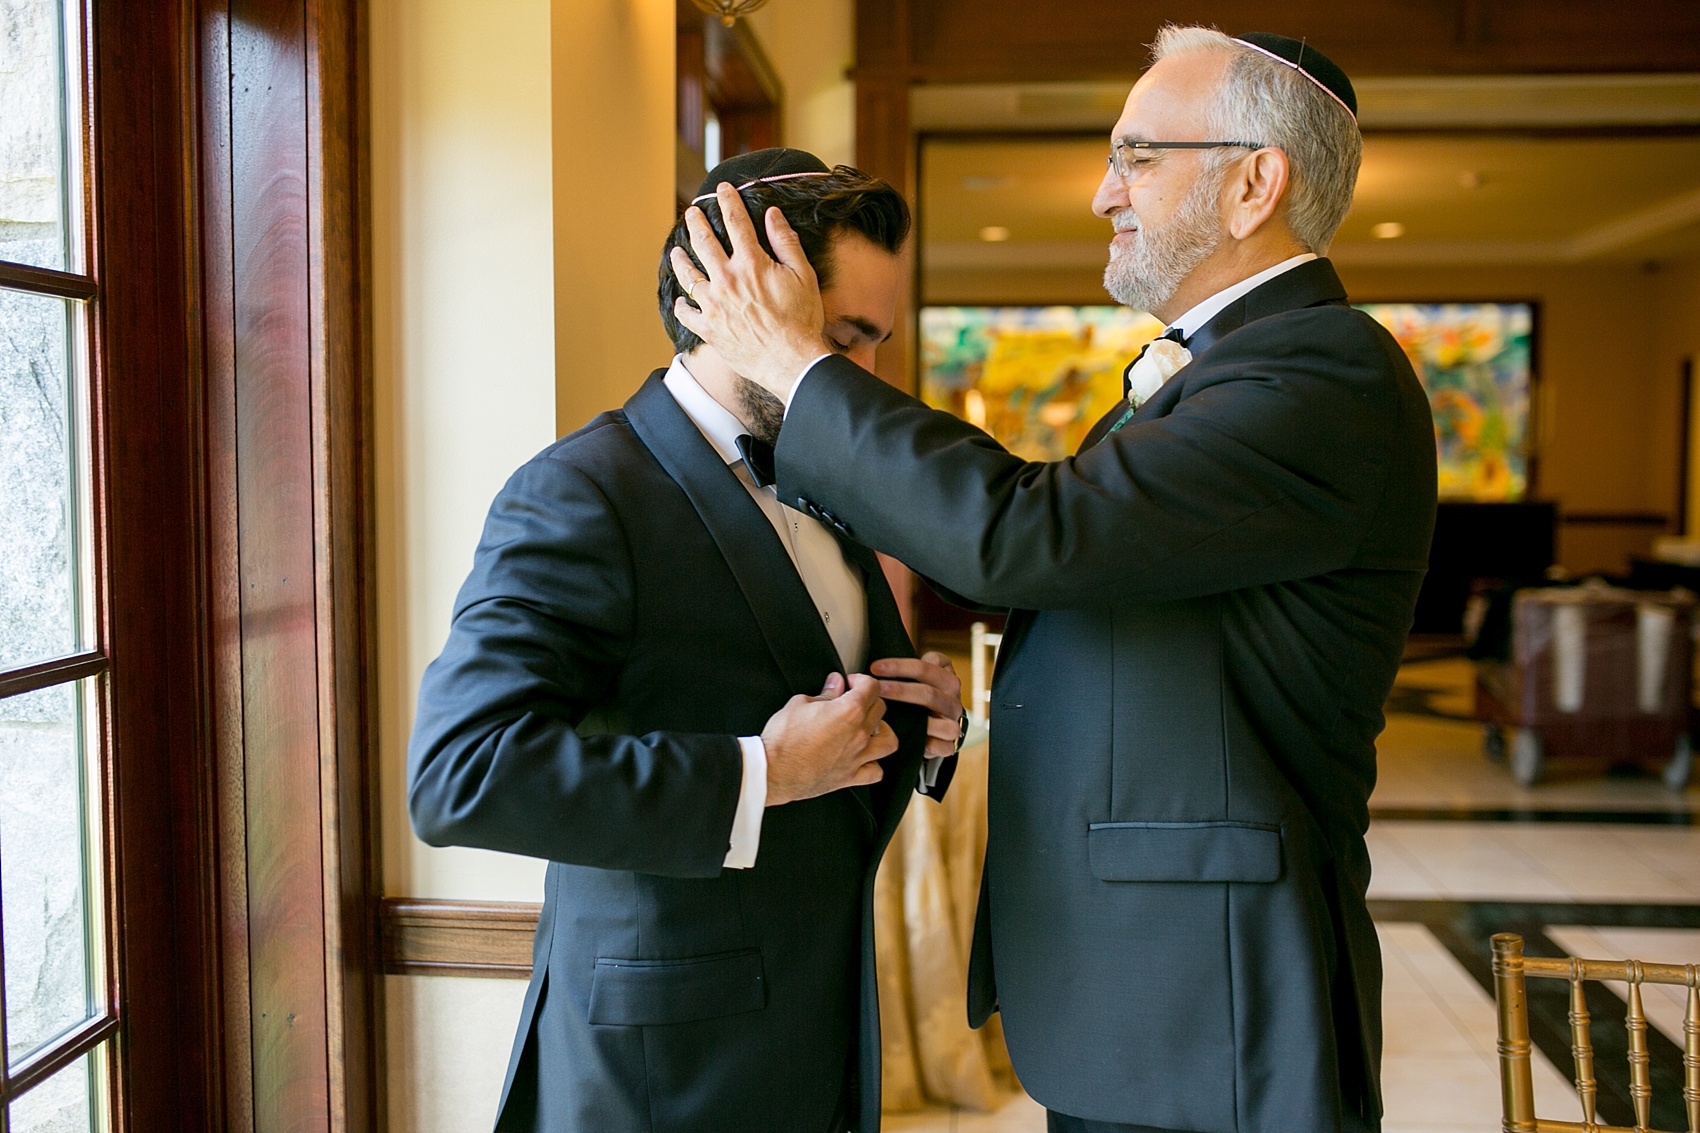 Mikkel Paige Photography photo of the groom and his father preparing for his wedding day at Temple Emanu-El in Closter, NJ.